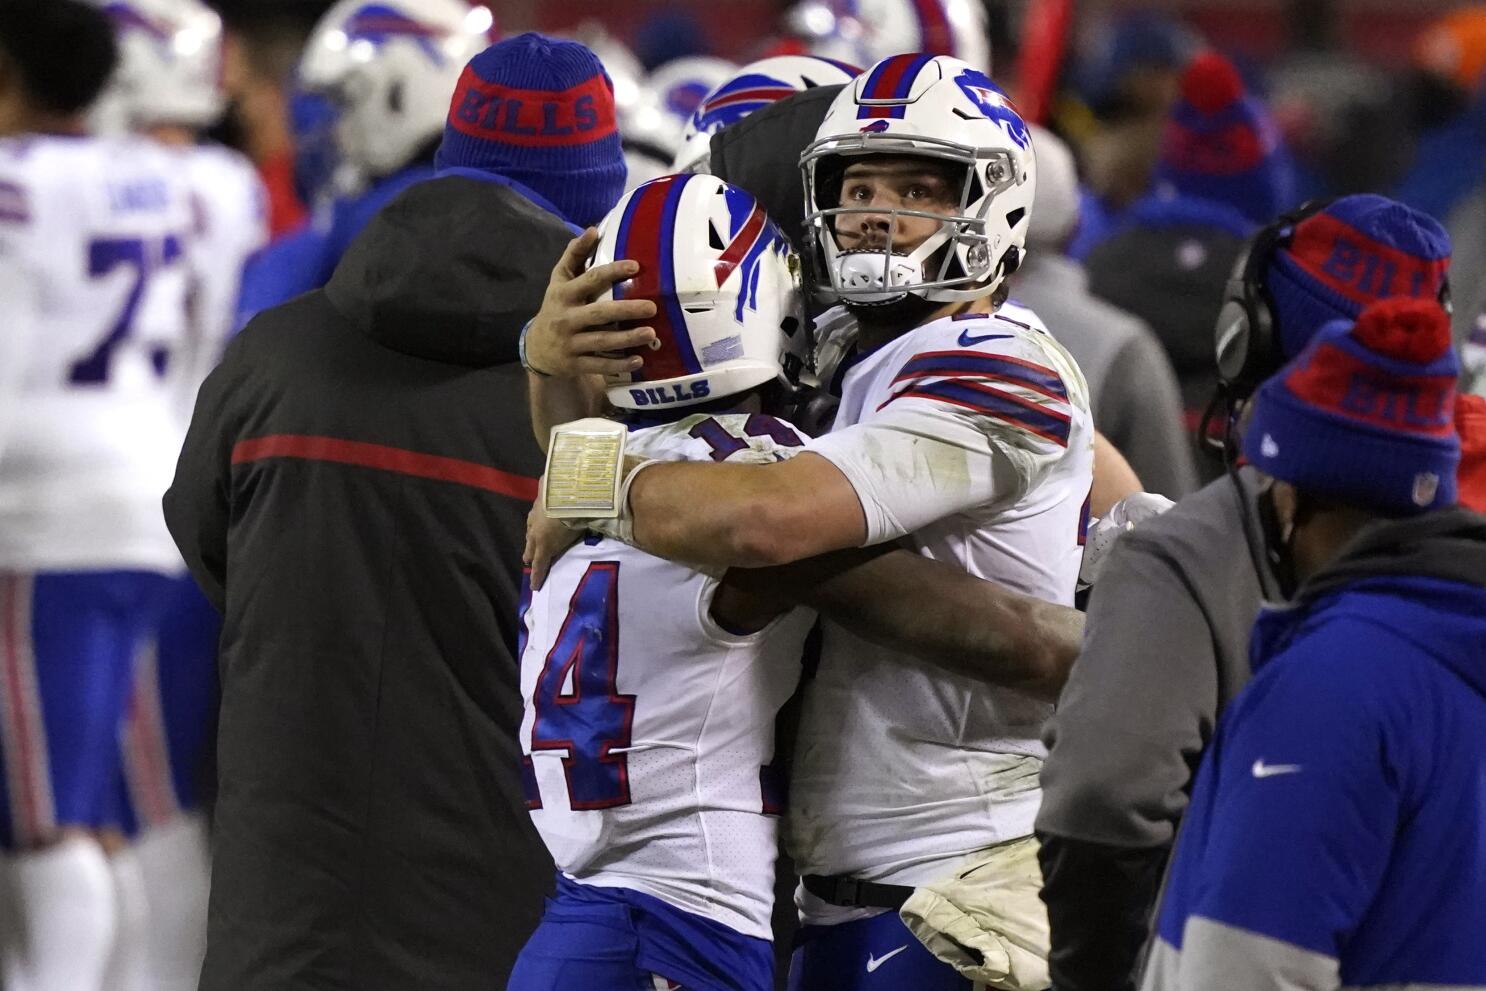 Josh Allen Says He Has To Be More Careful: 'I'm Getting